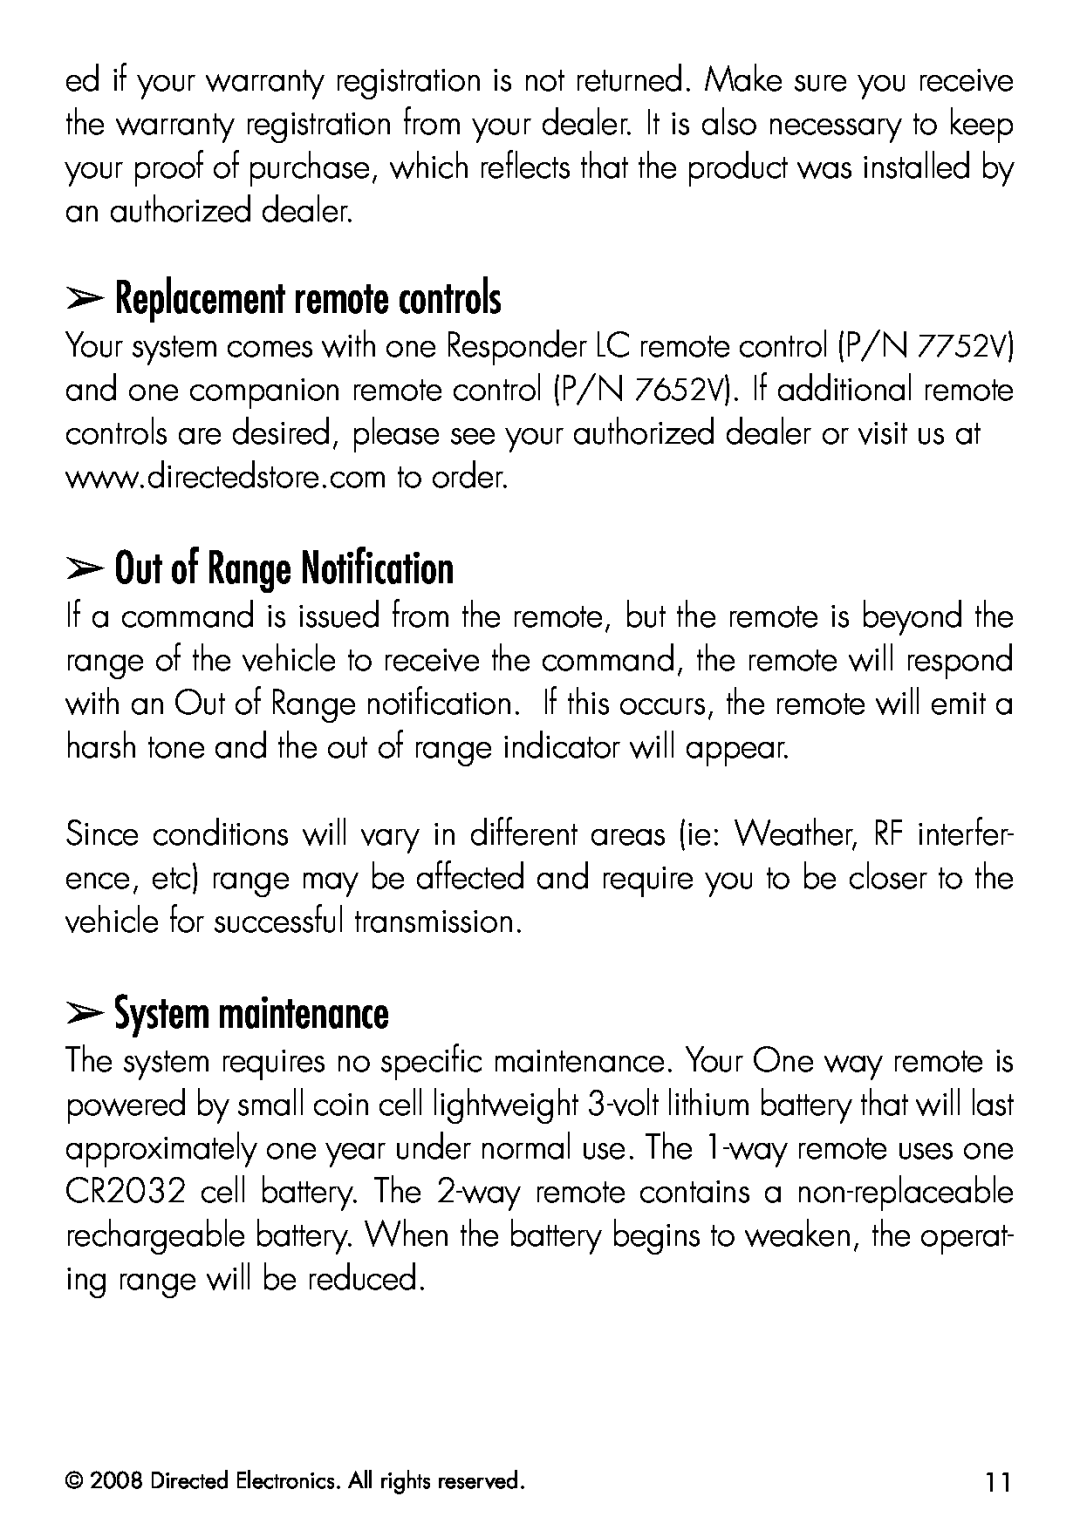 Viper 5901 manual Replacement remote controls, Out of Range Notification, System maintenance 